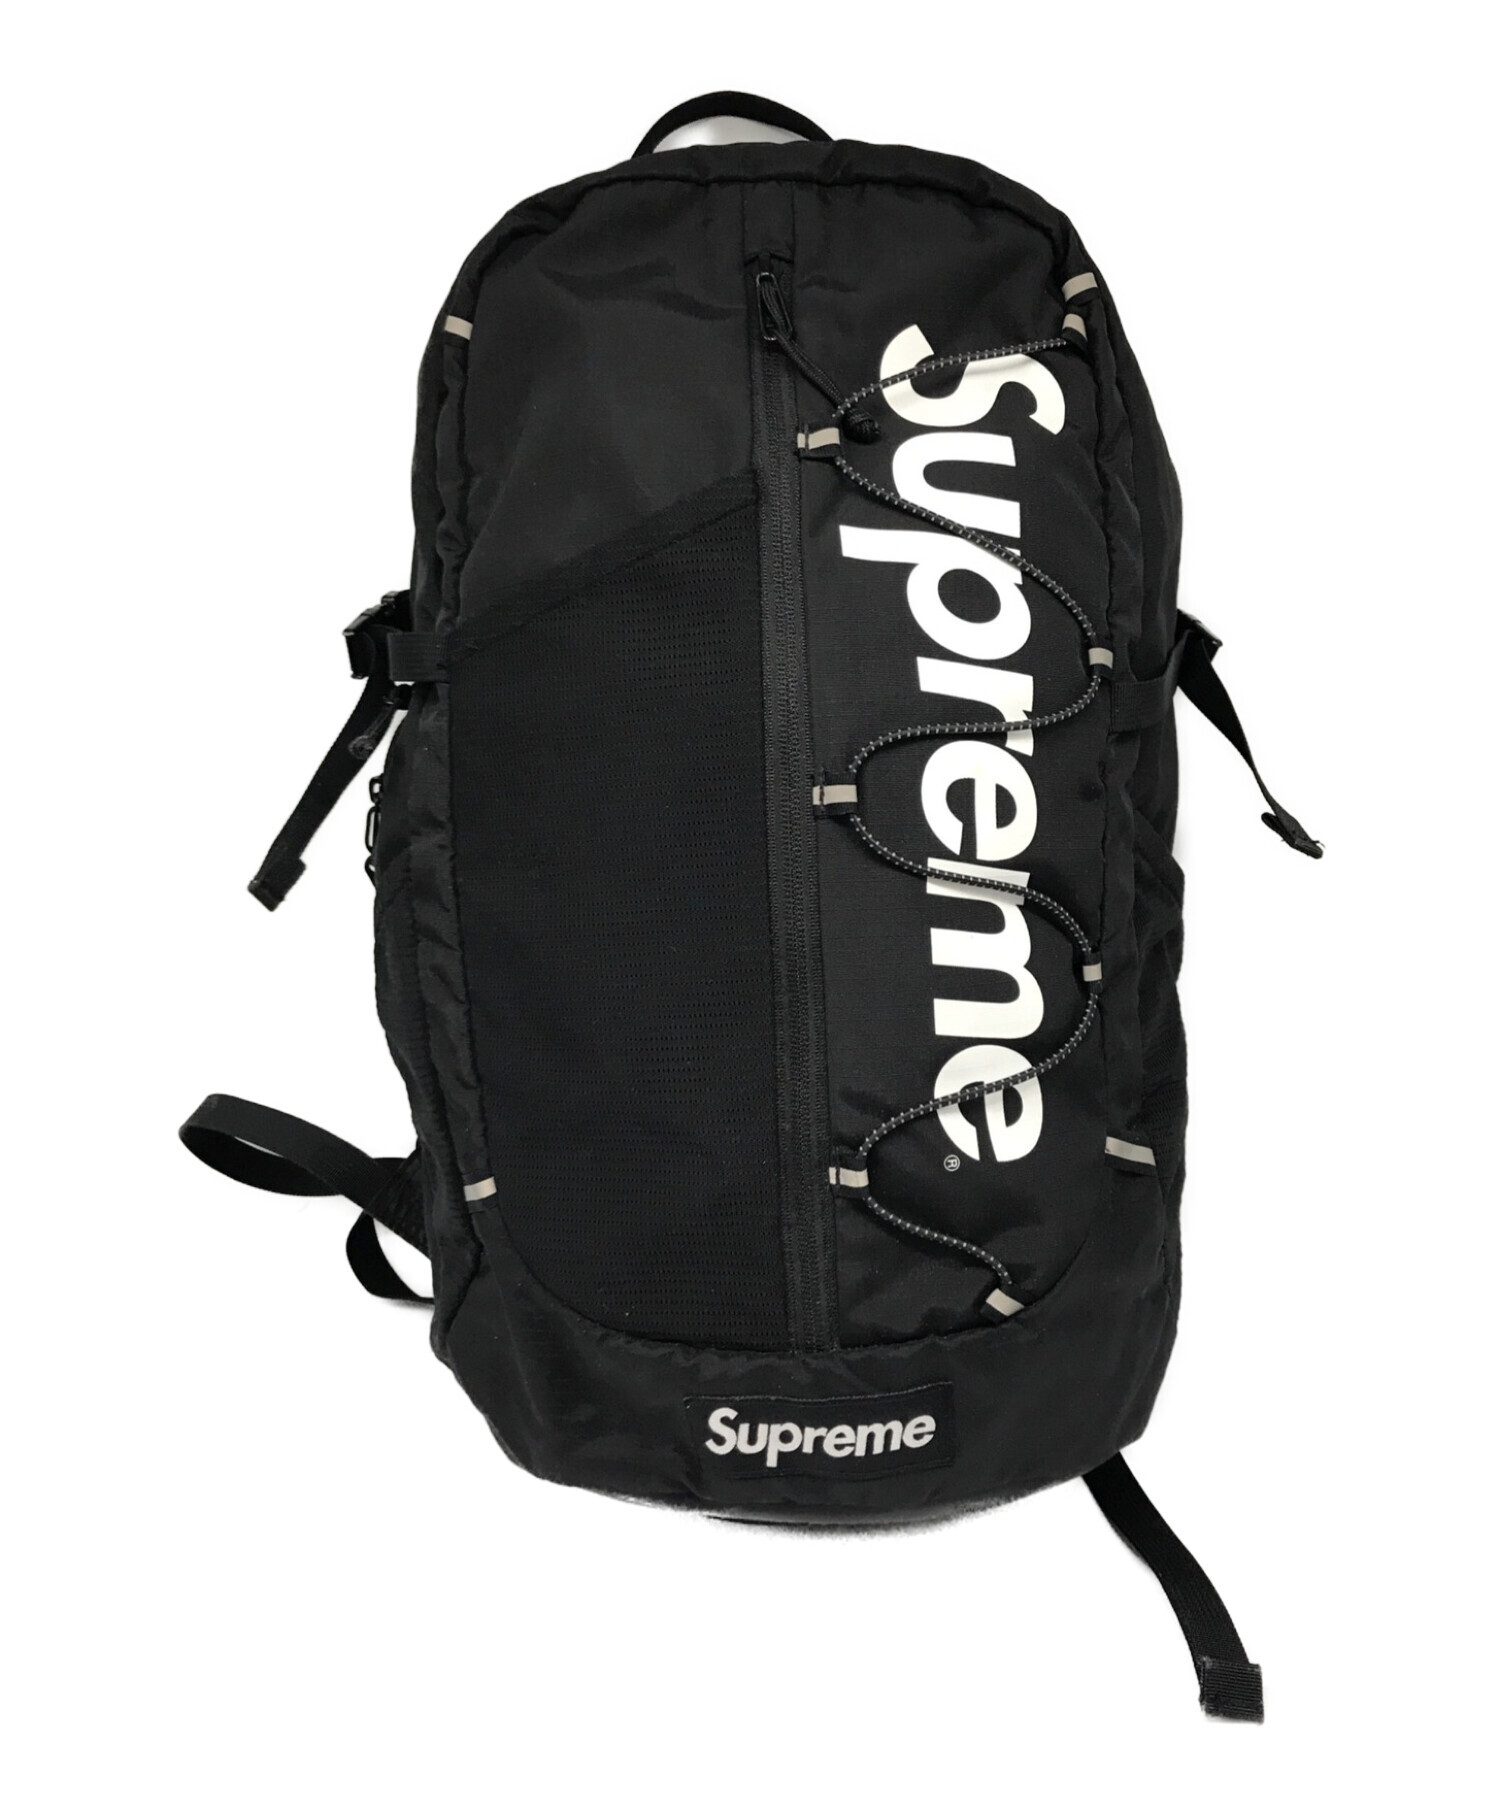 Supreme Backpack バックパック 17ssバッグパック/リュック - バッグ 